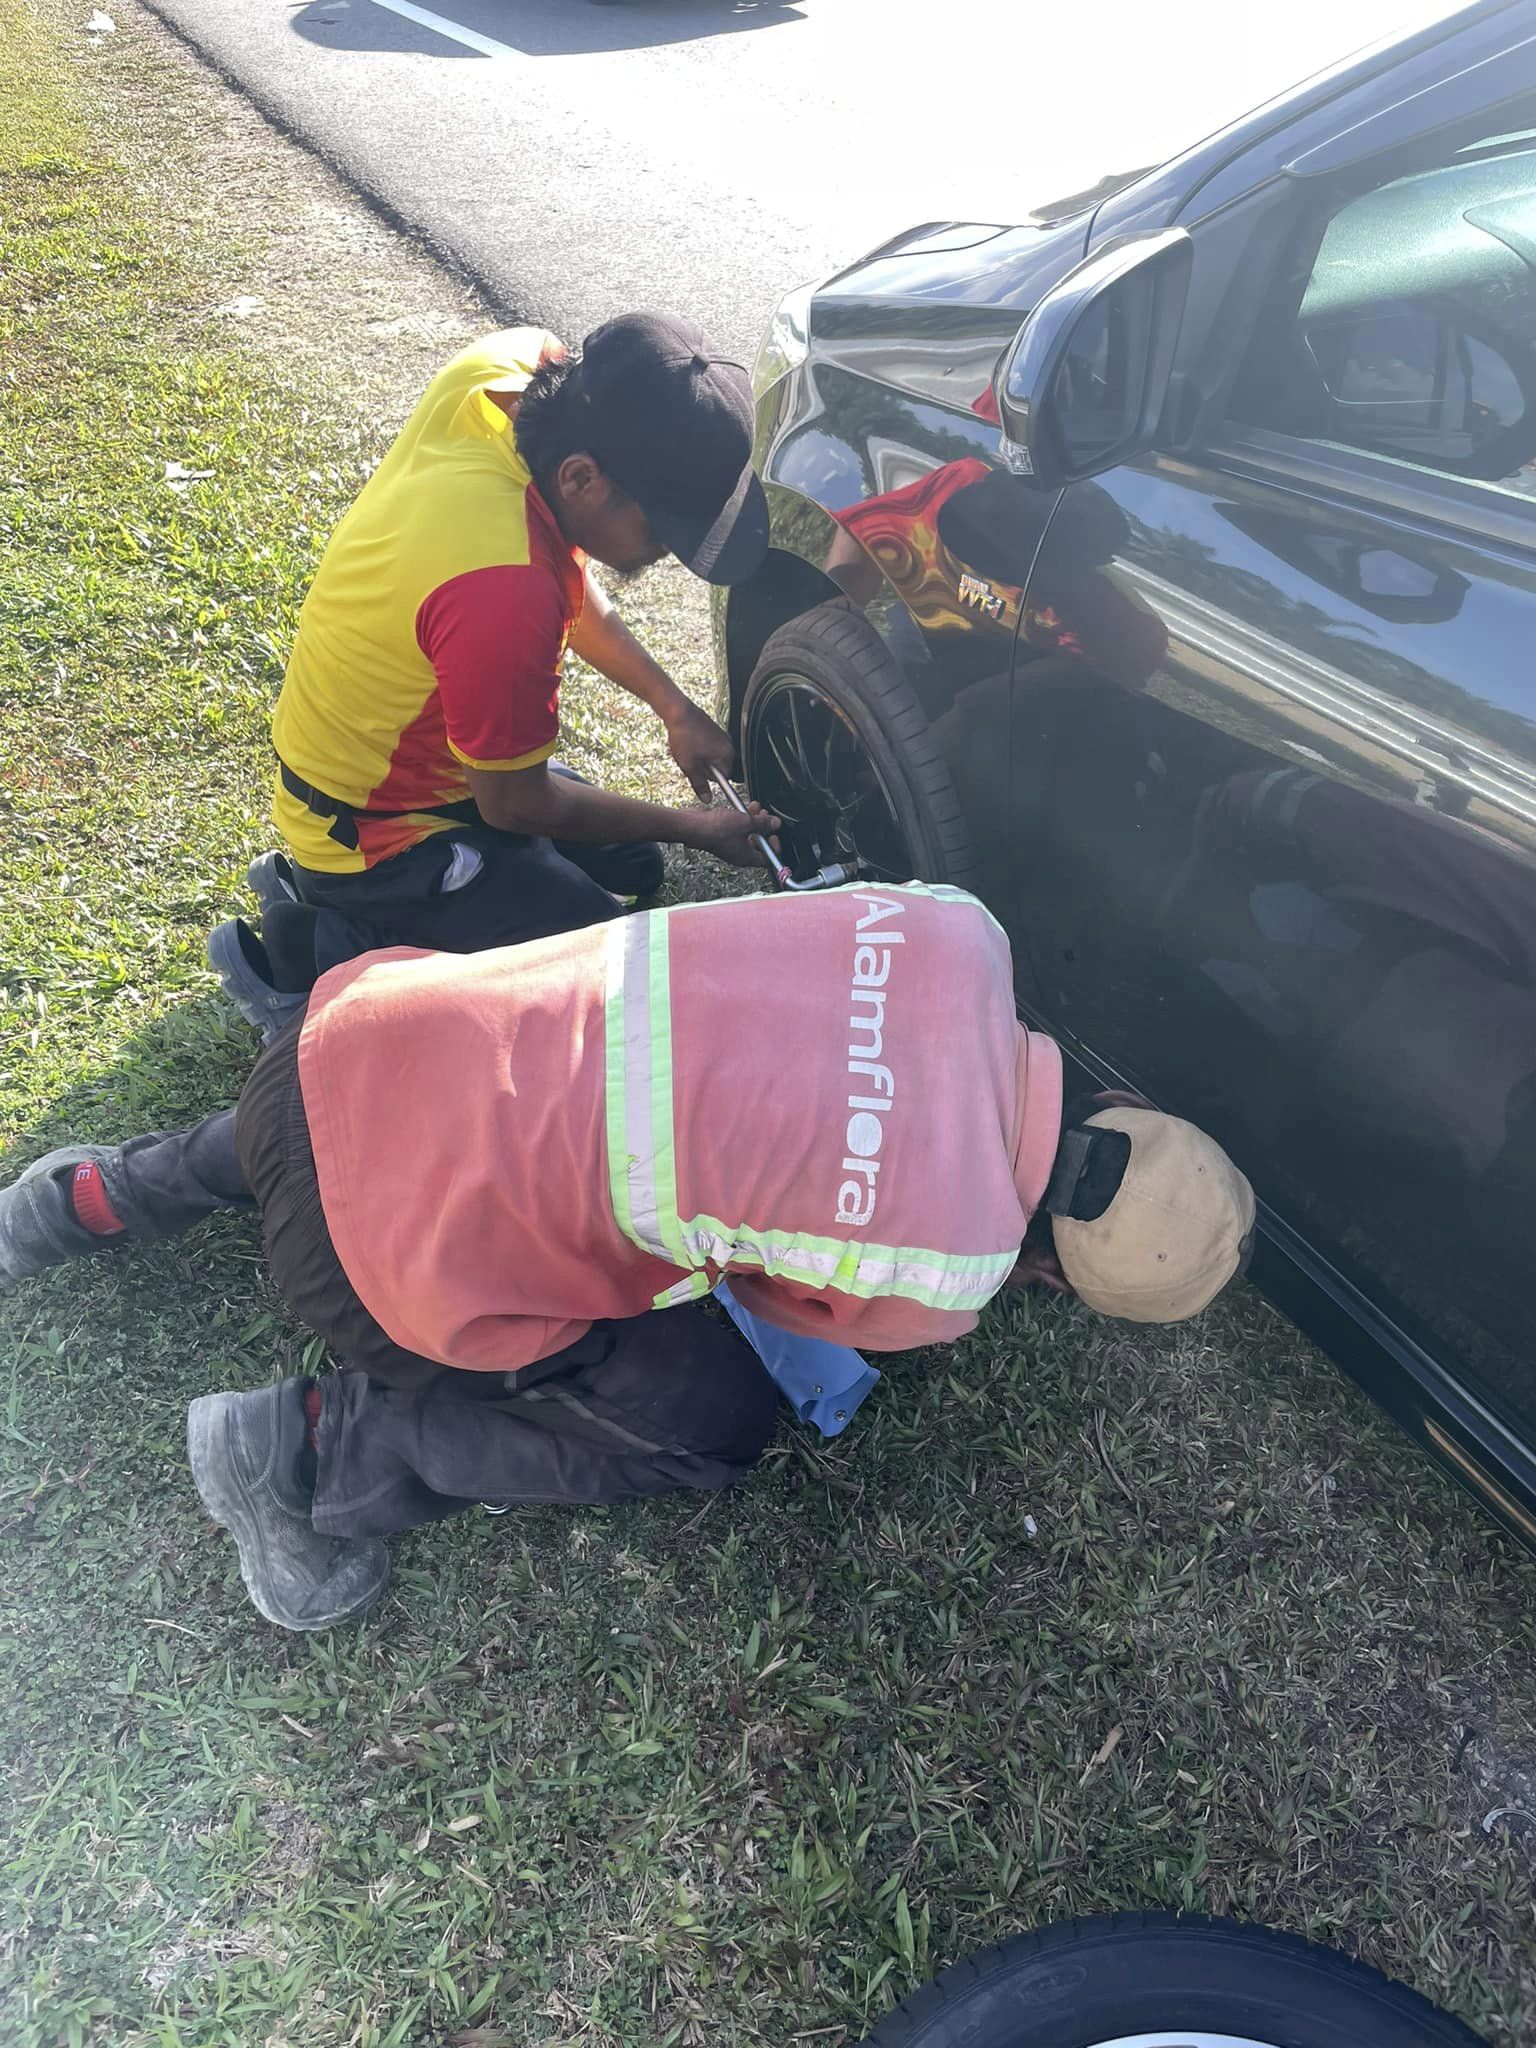 M'sian woman grateful to see alam flora staff stop to help change her tyre along the highway | weirdkaya